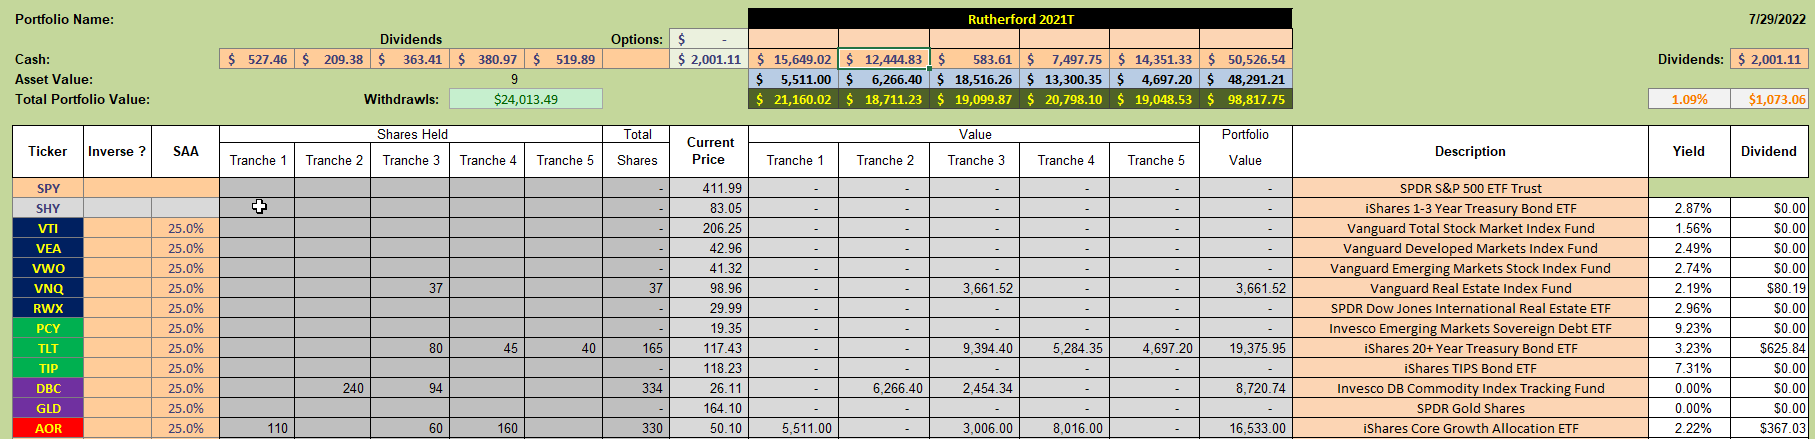 Rutherford Portfolio Review (Tranche 2): 29 July 2022 4